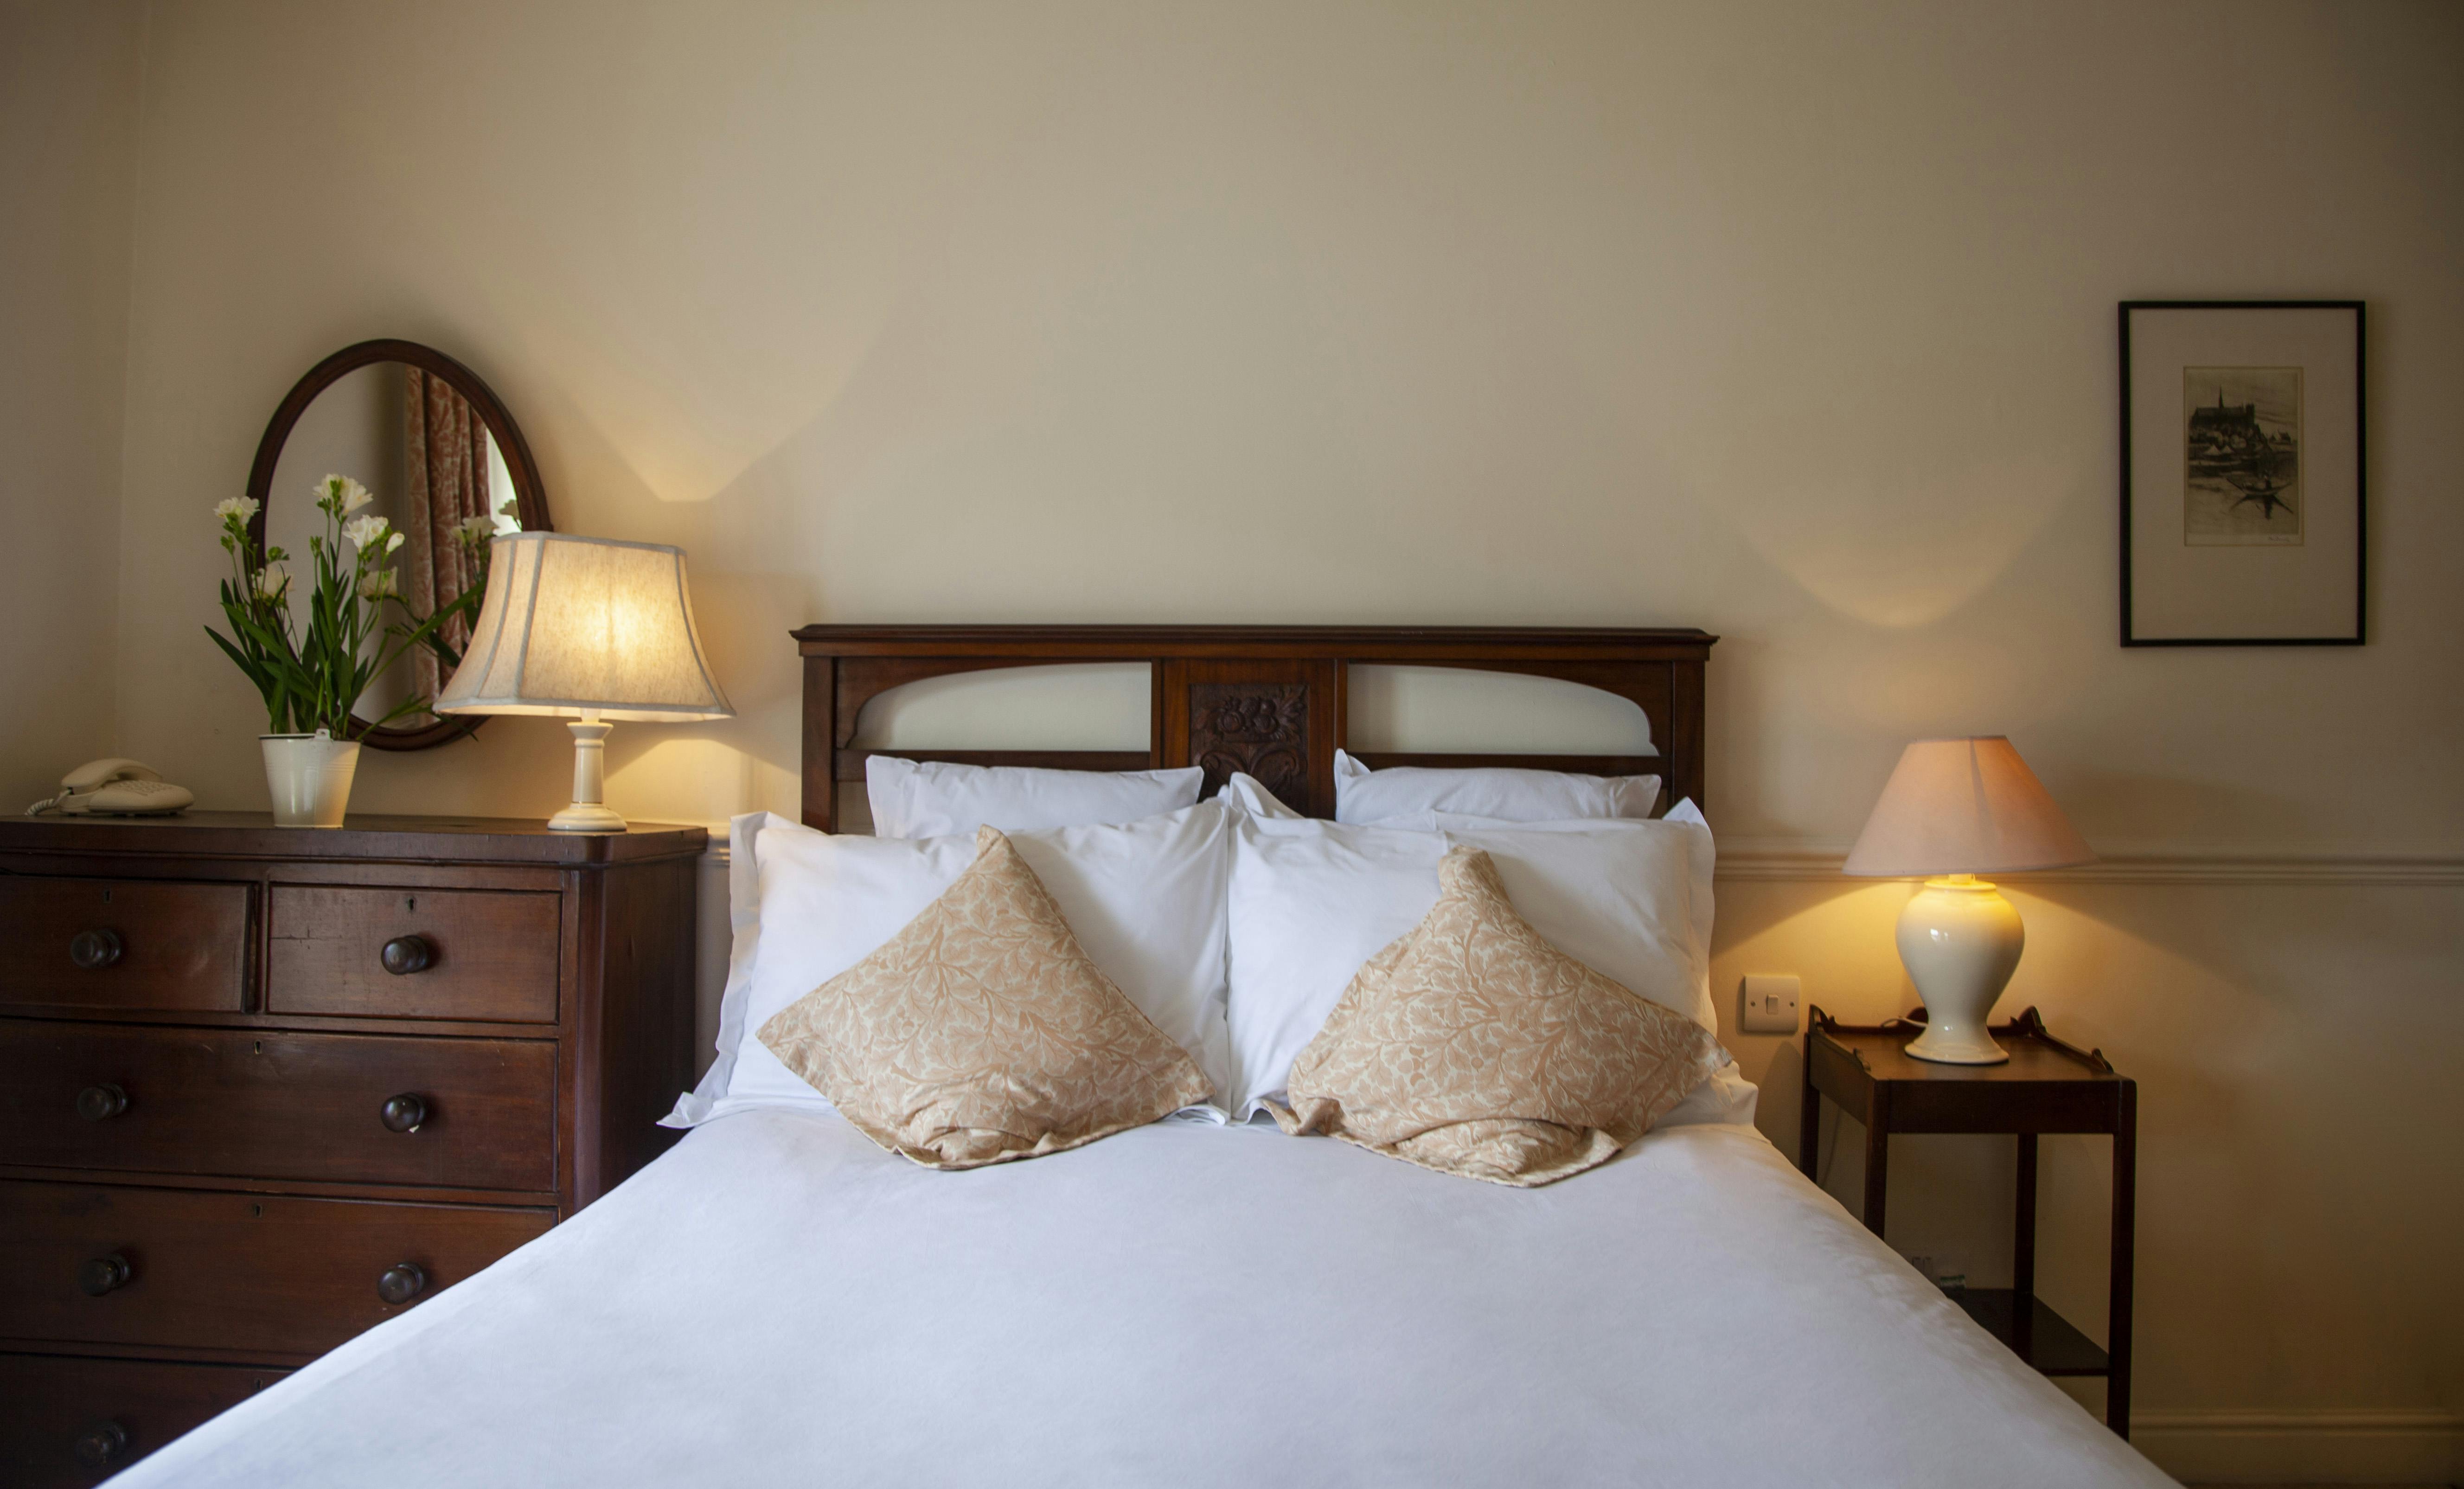 The Wensleydale Hotel, Middleham, offers boutique accommodation in the heart of the Yorkshire Dales